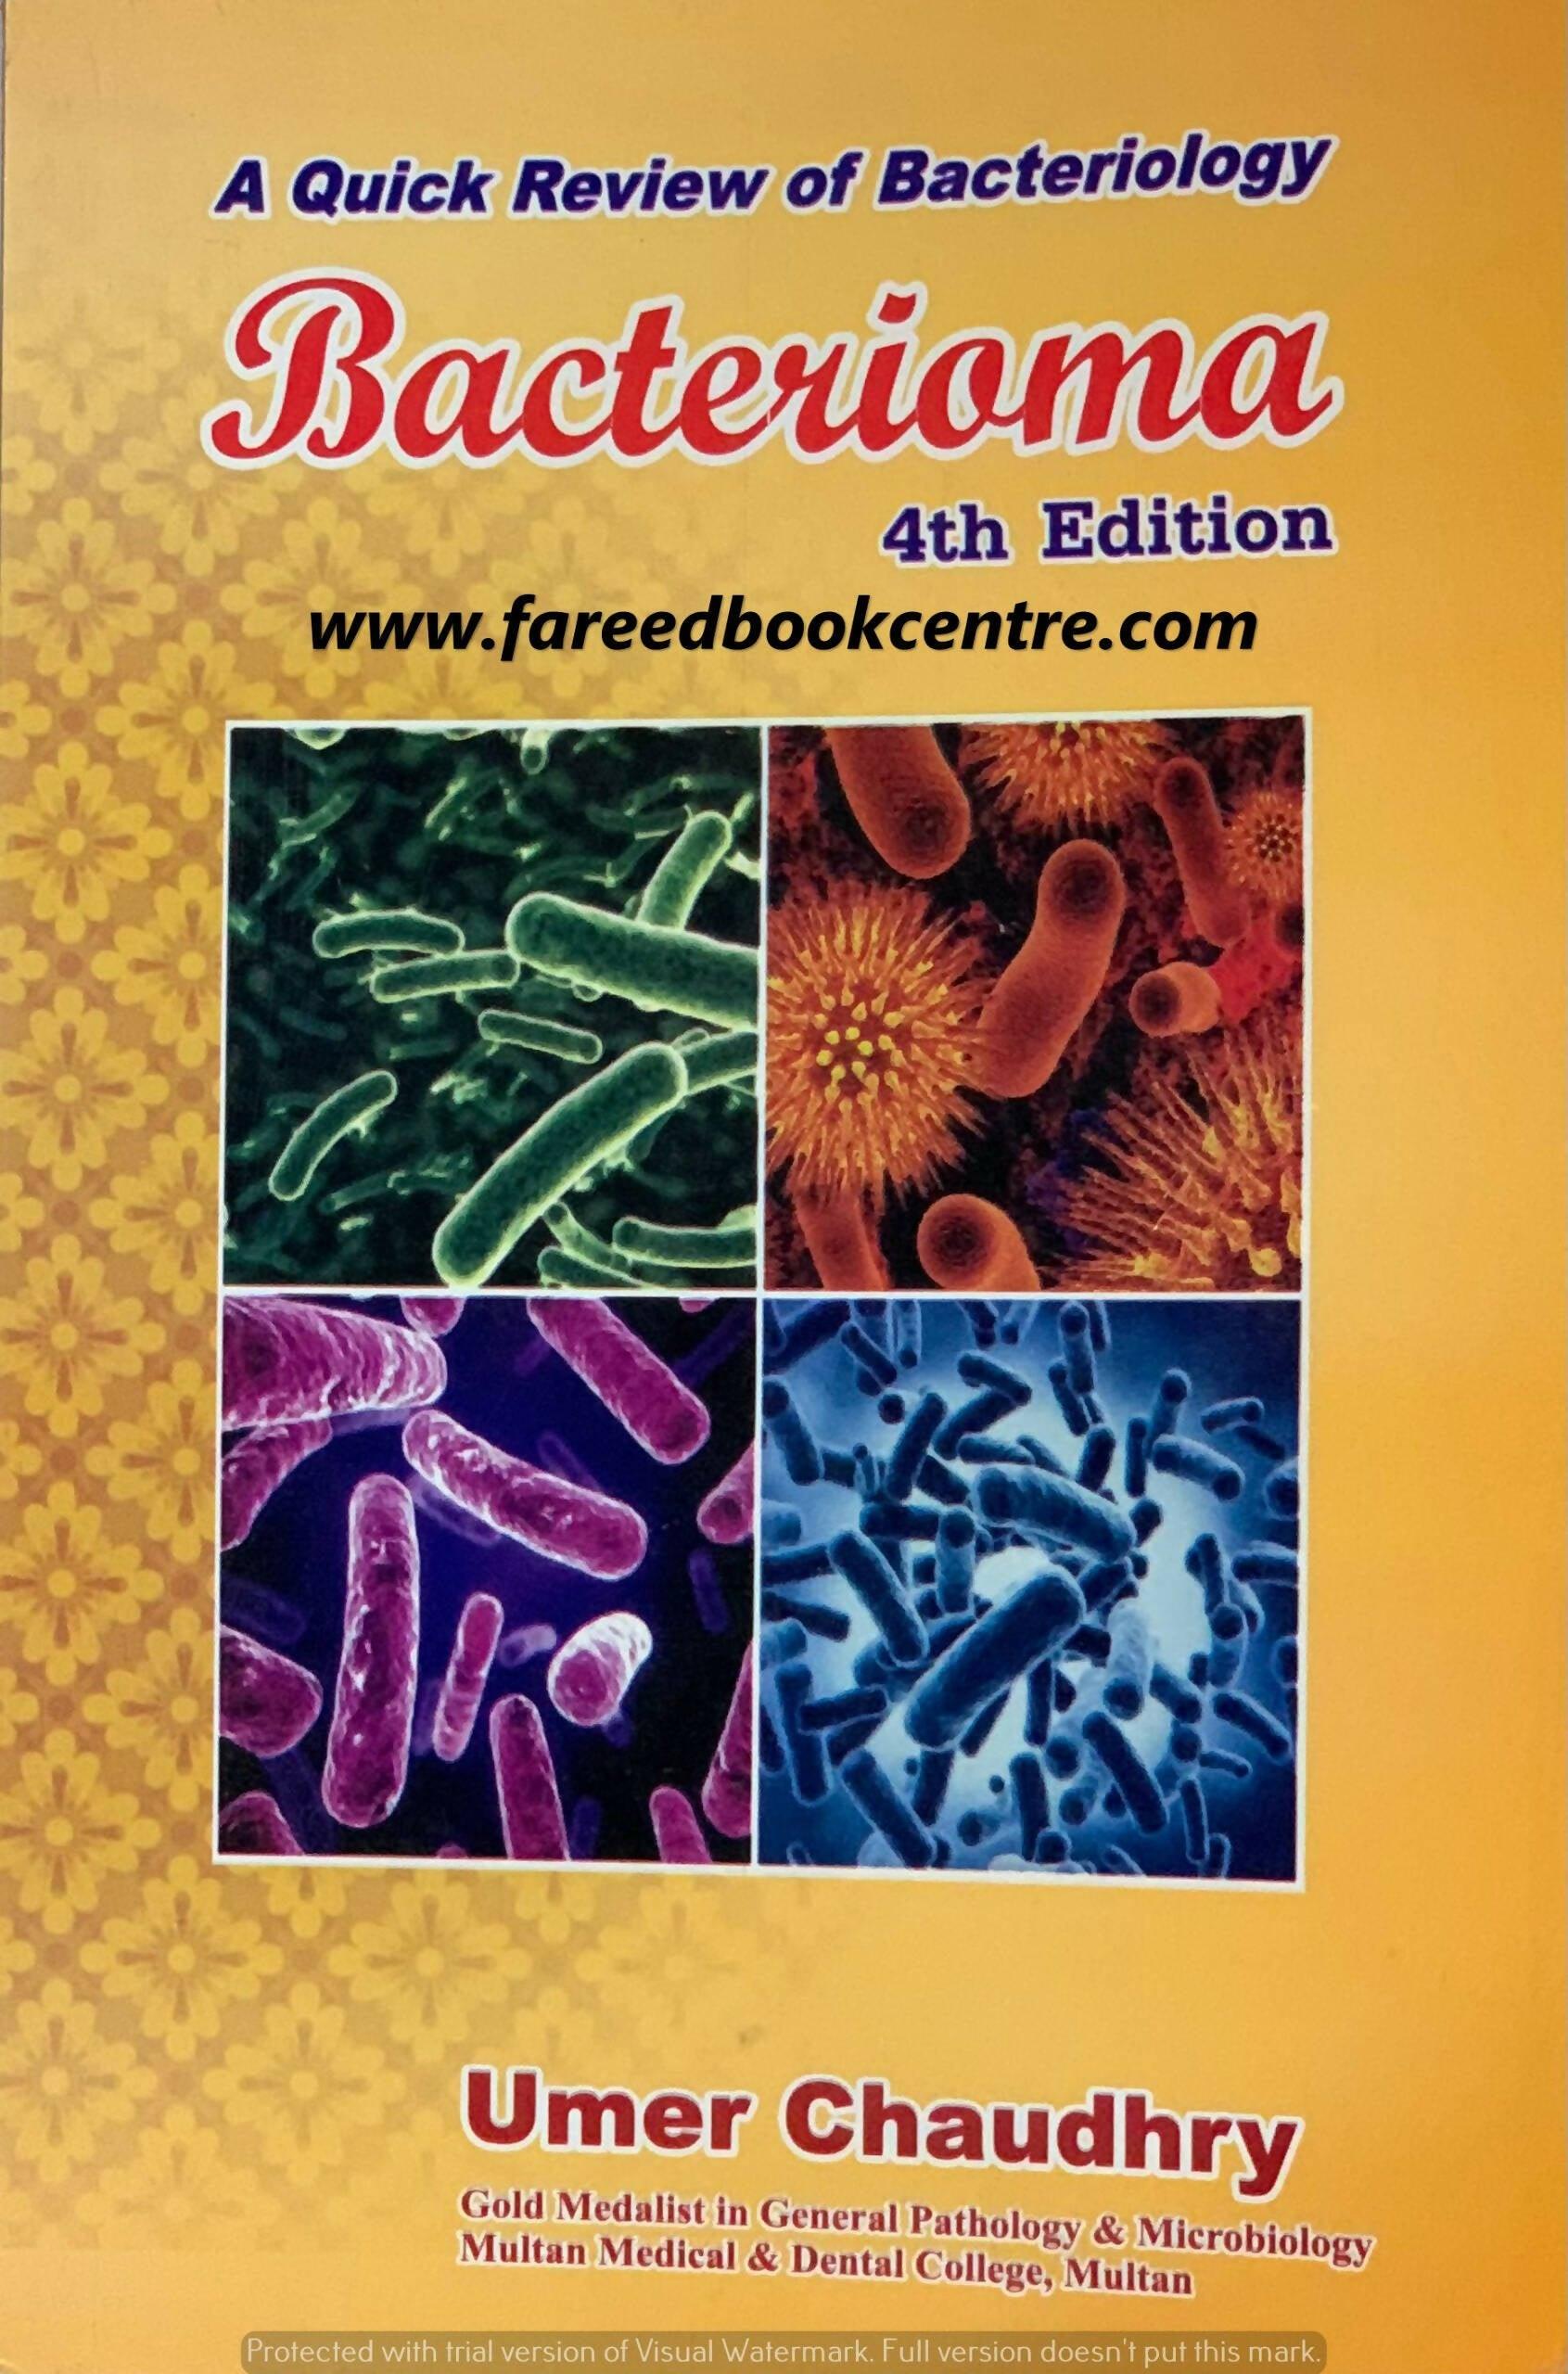 Bacterioma 4th Edition By Umer Chaudhry - ValueBox